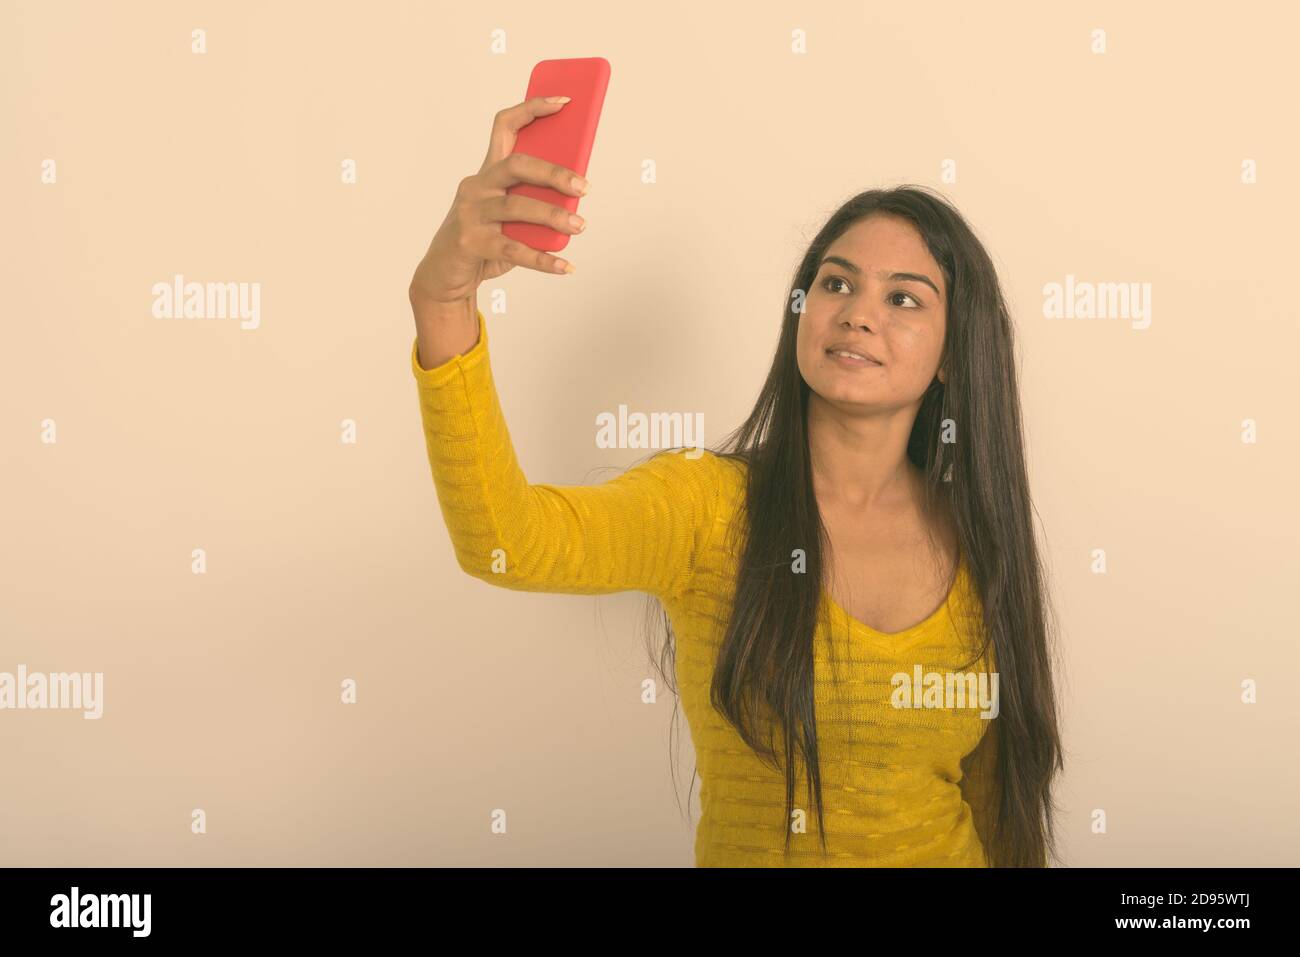 Studio shot of young happy Indian woman smiling while taking selfie picture with mobile phone against white background Stock Photo